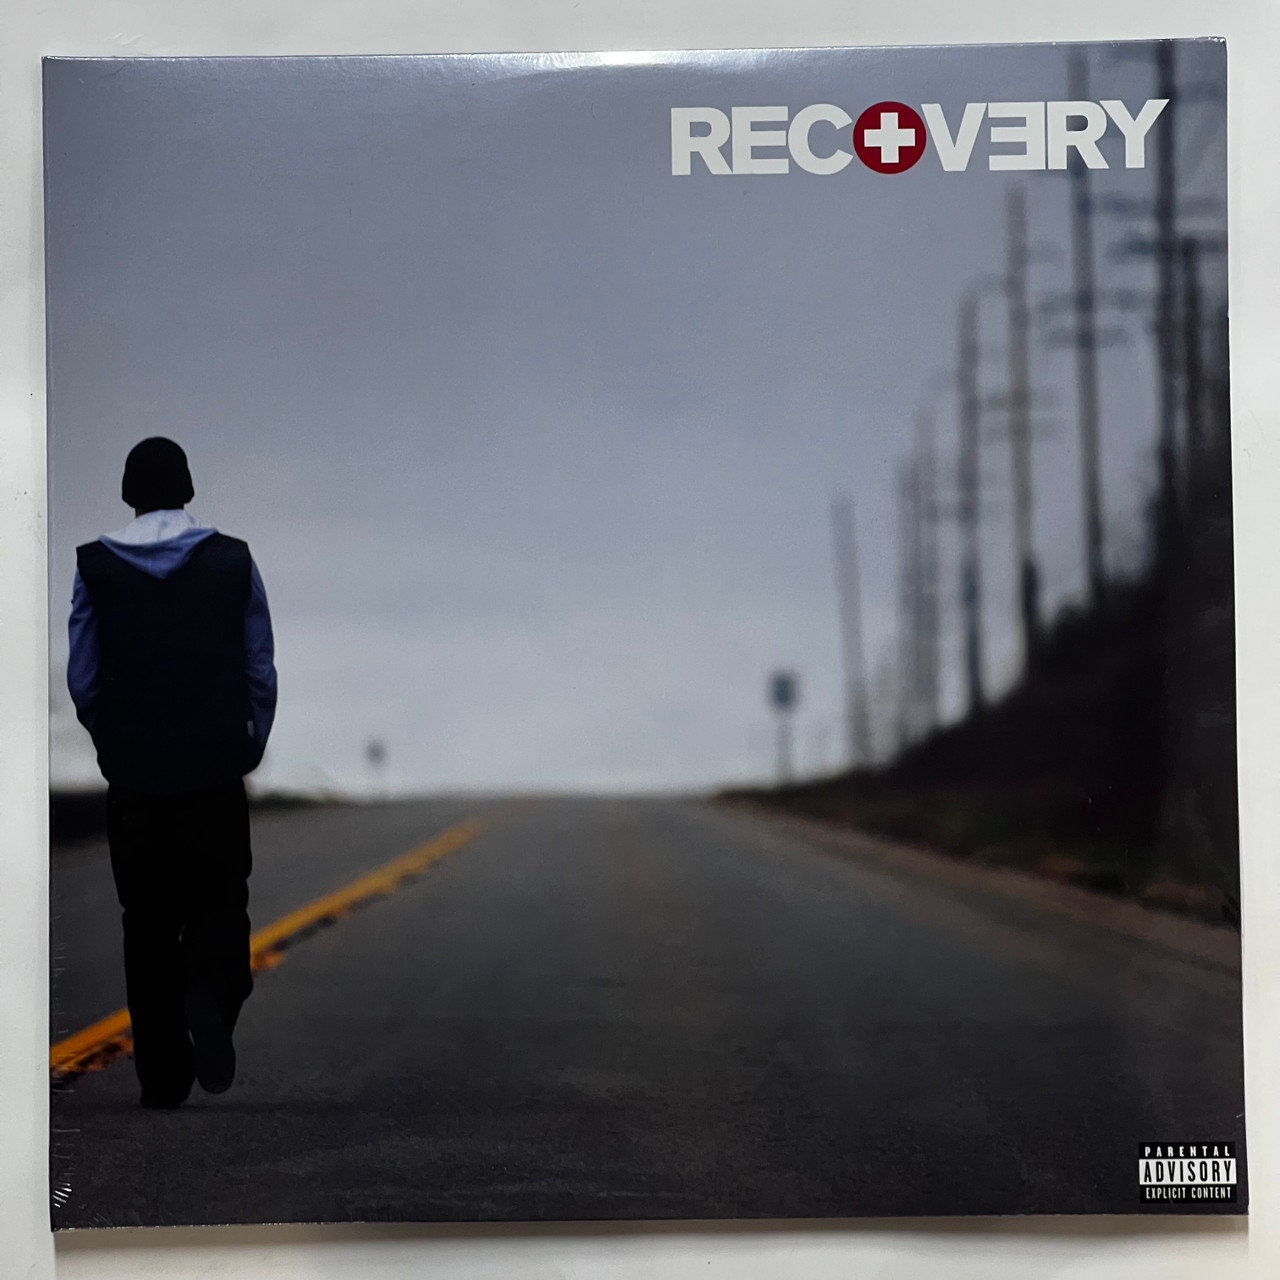 Eminem - Recovery - Double Vinyle – VinylCollector Official FR